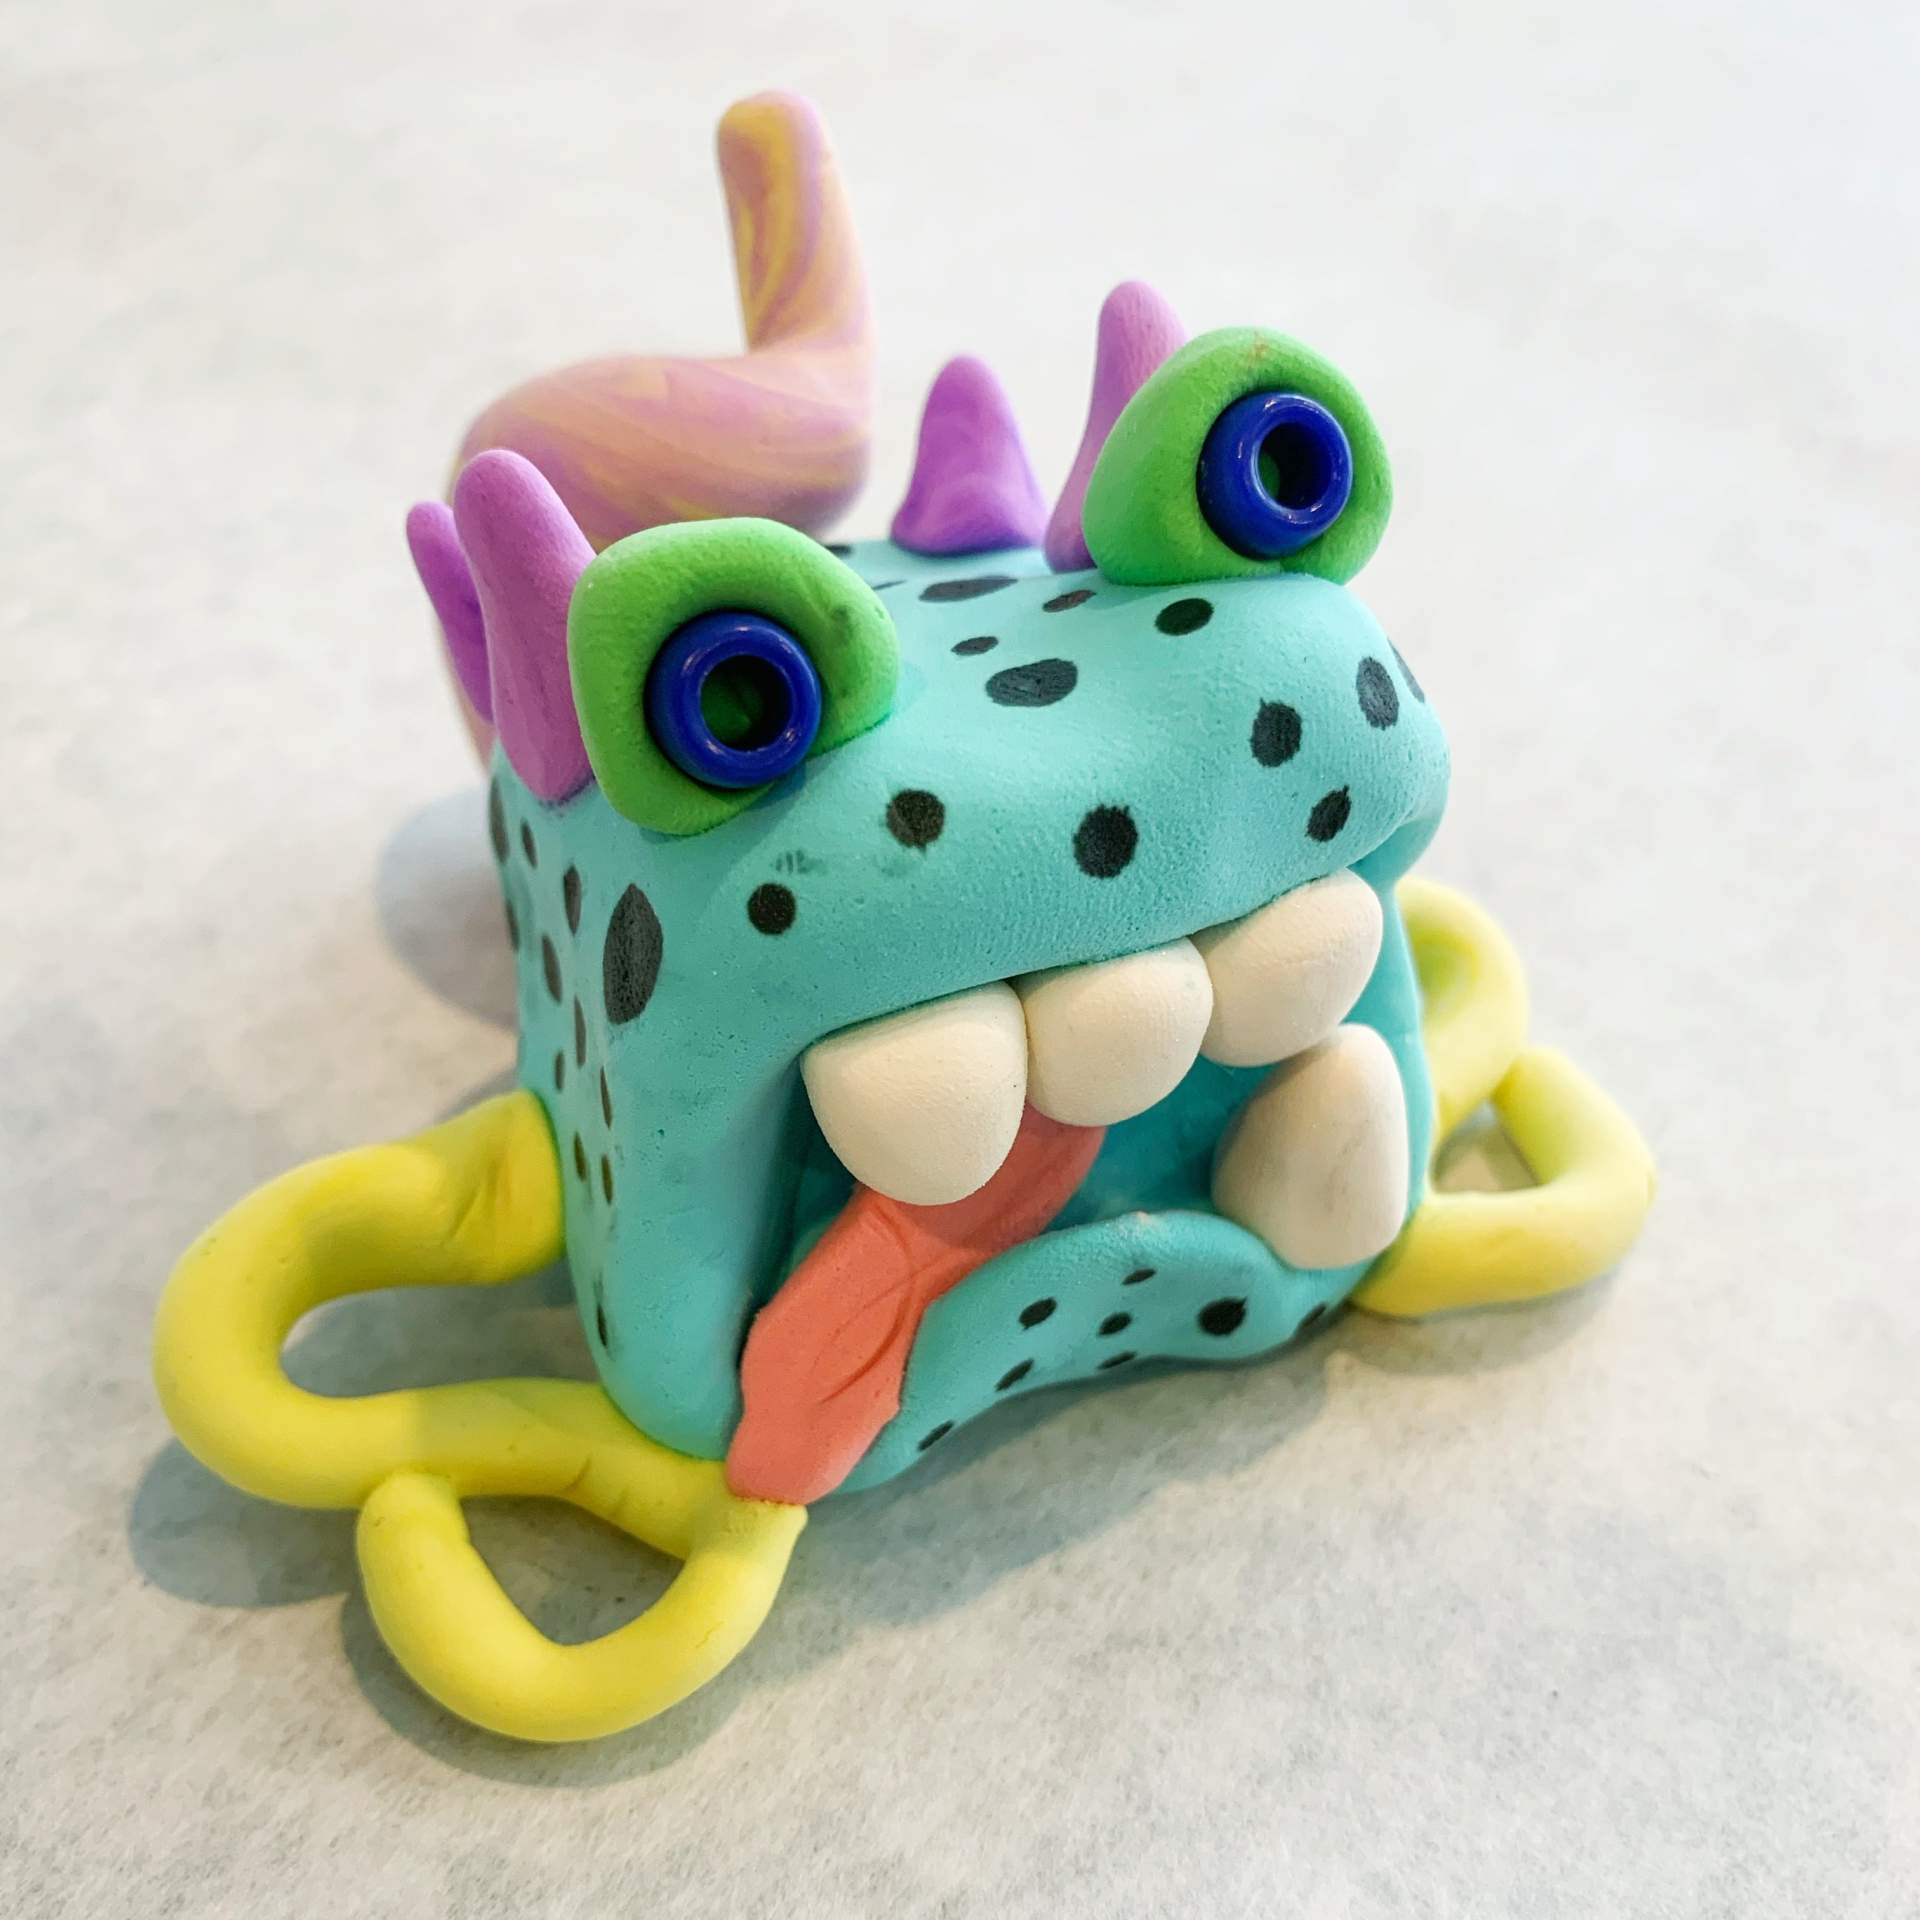 At-Home Art Activities: Clay Monsters Inspired by Bill Stewart